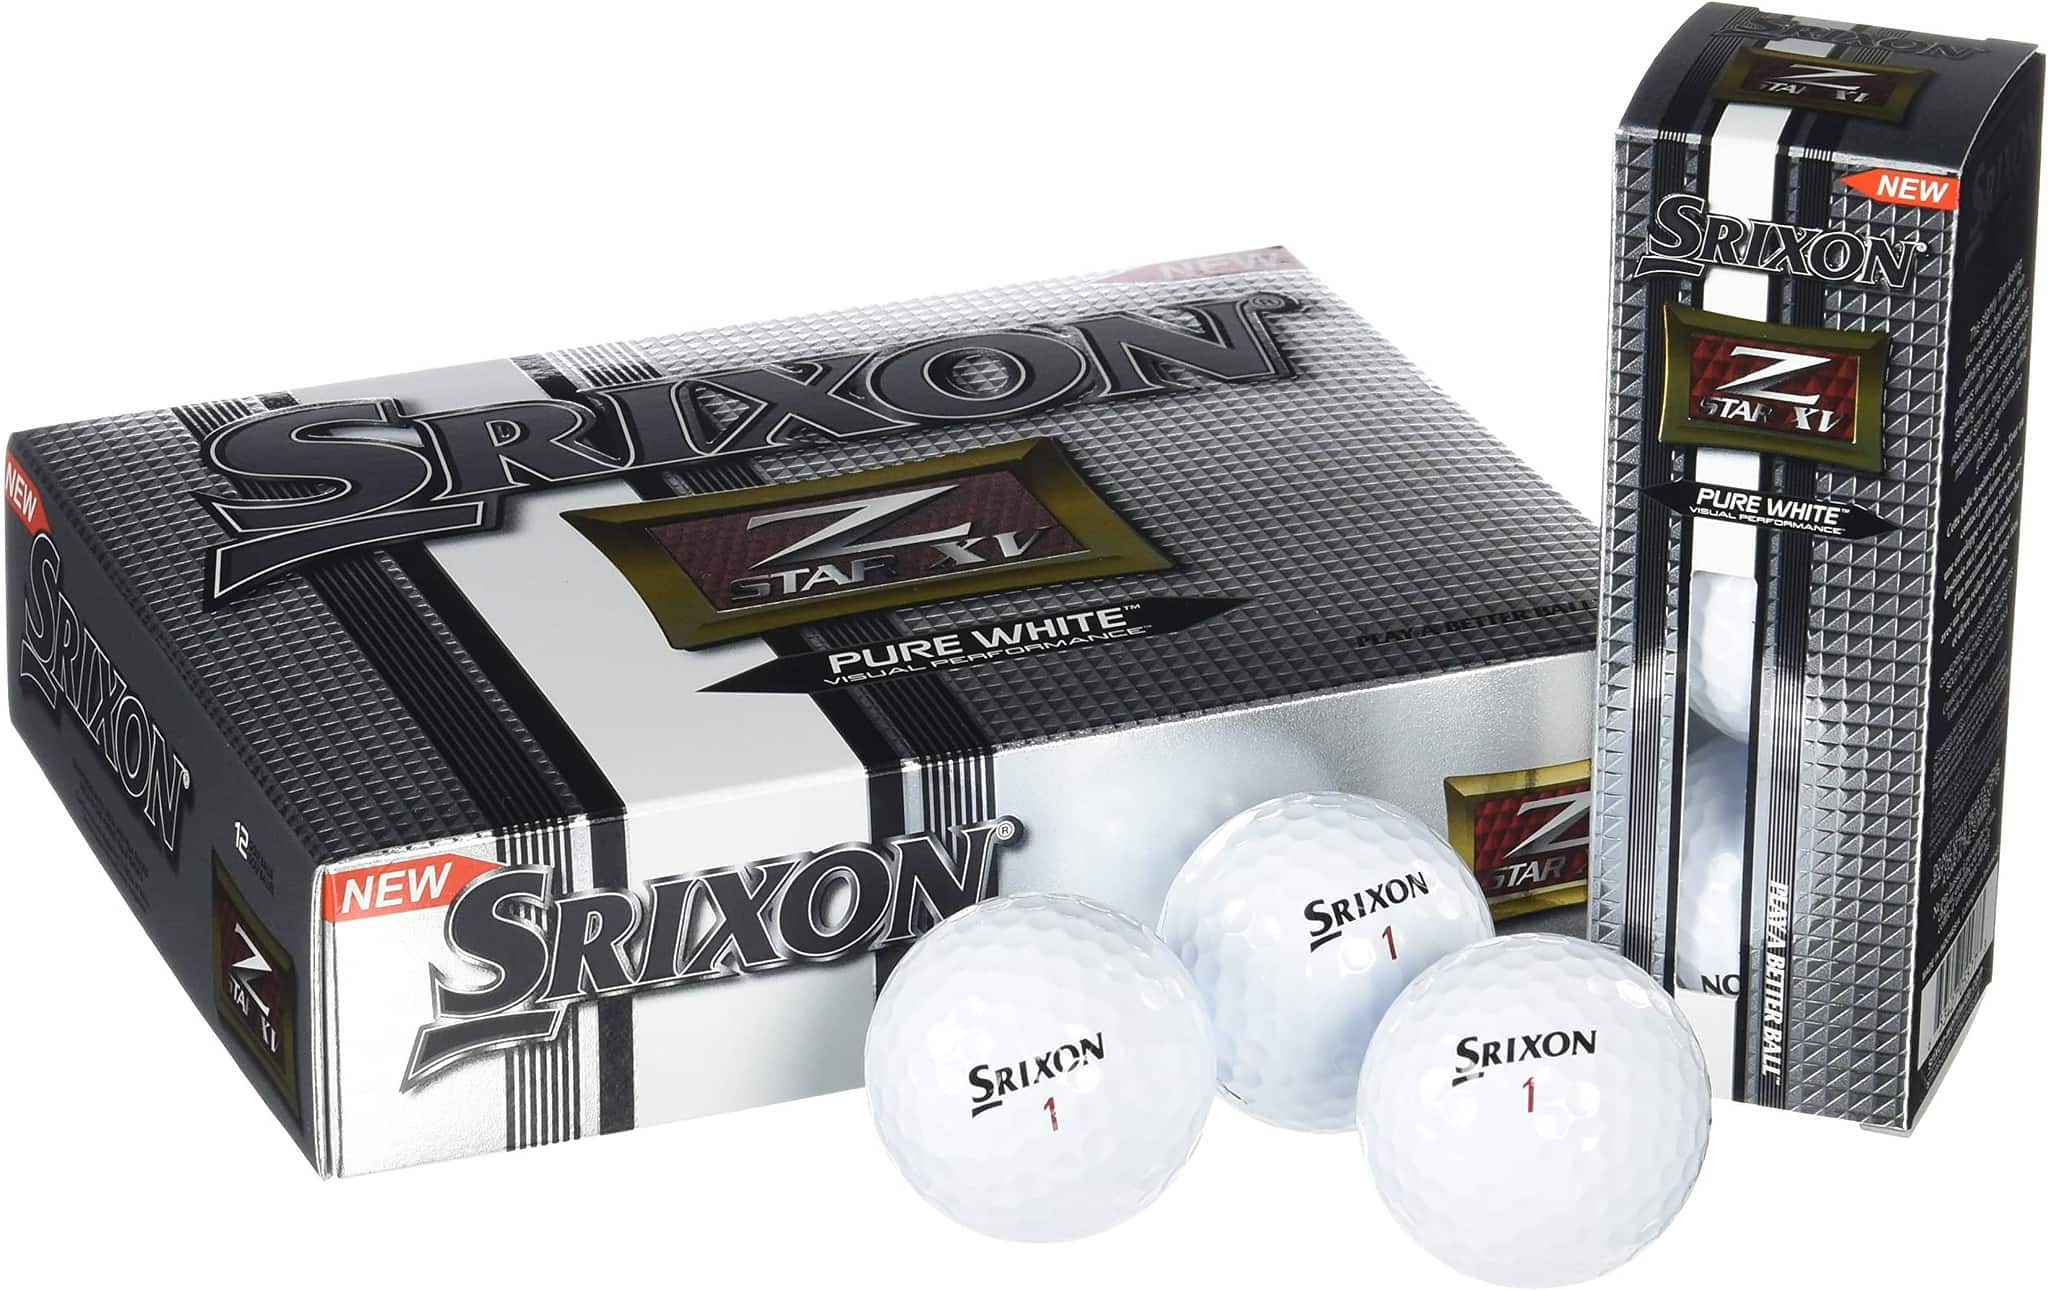 Srixon Z Star vs Q Star Are they Really Different? Get In The Hole